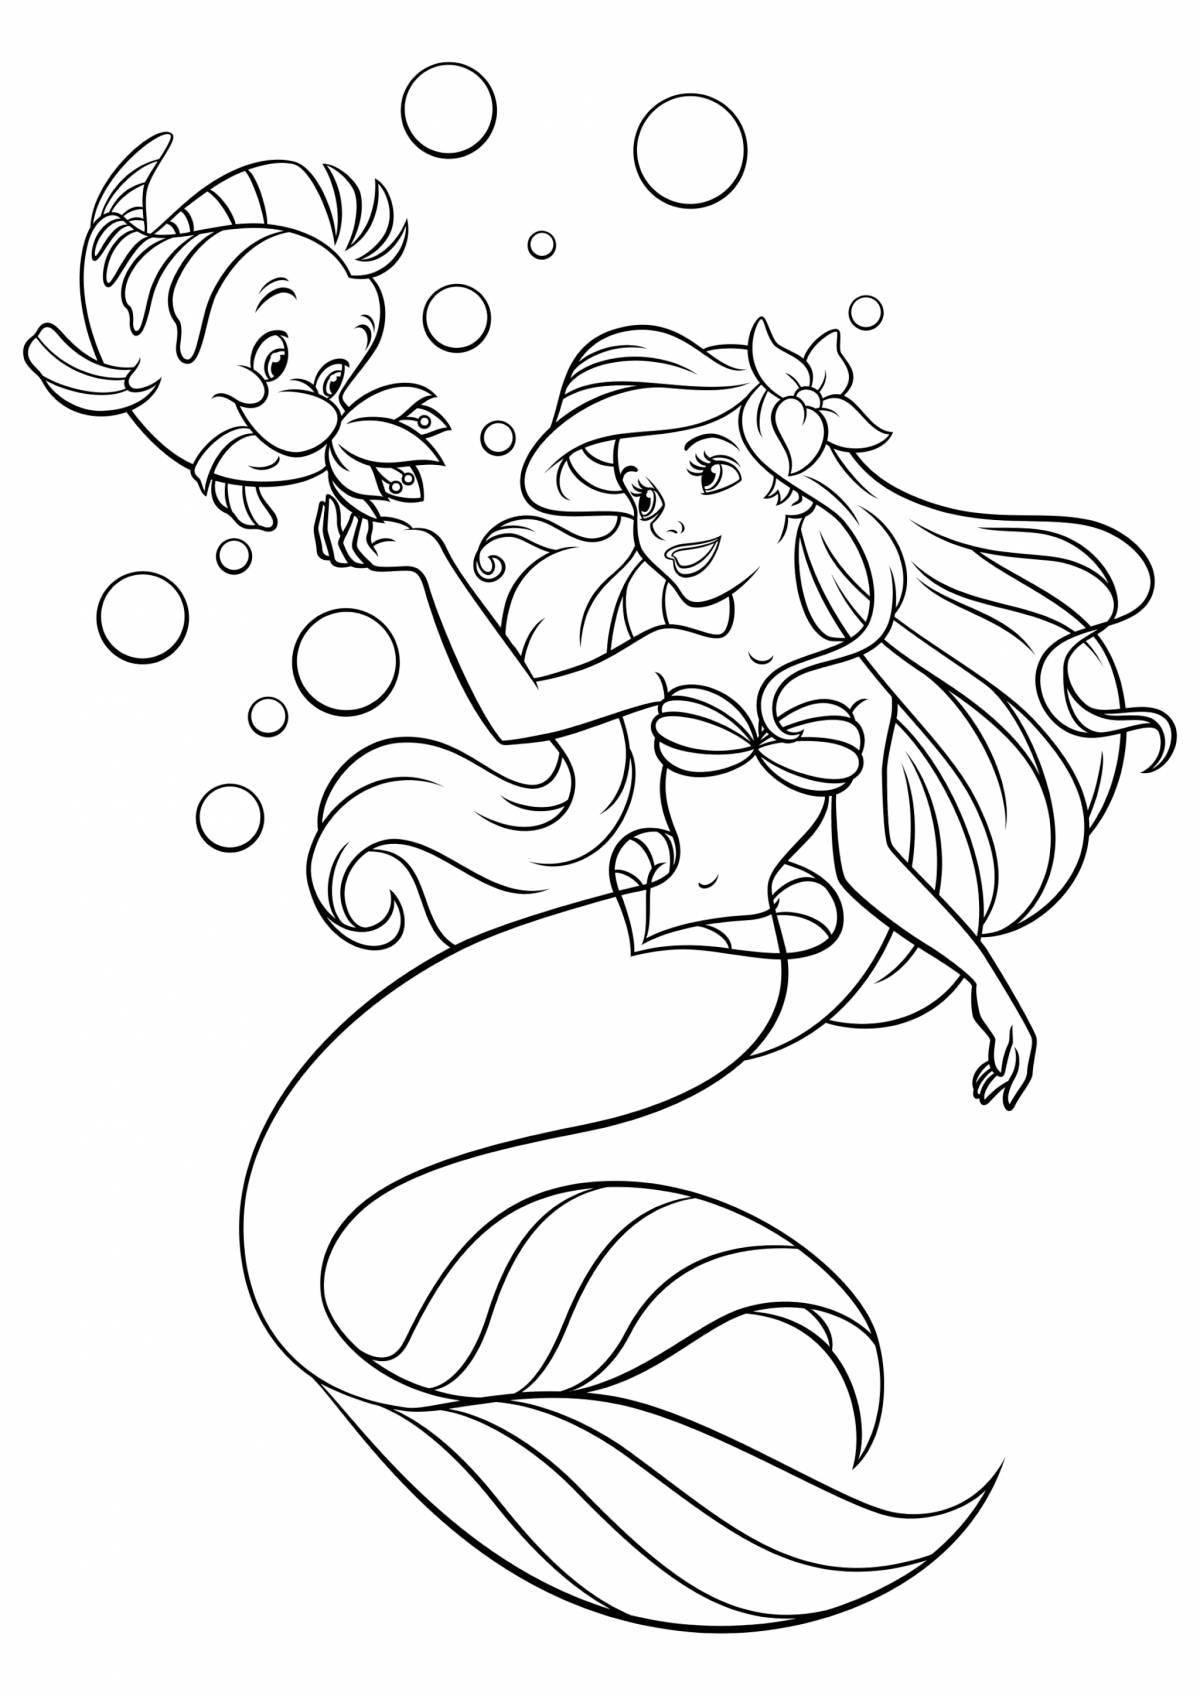 Live coloring mermaid for children 3-4 years old